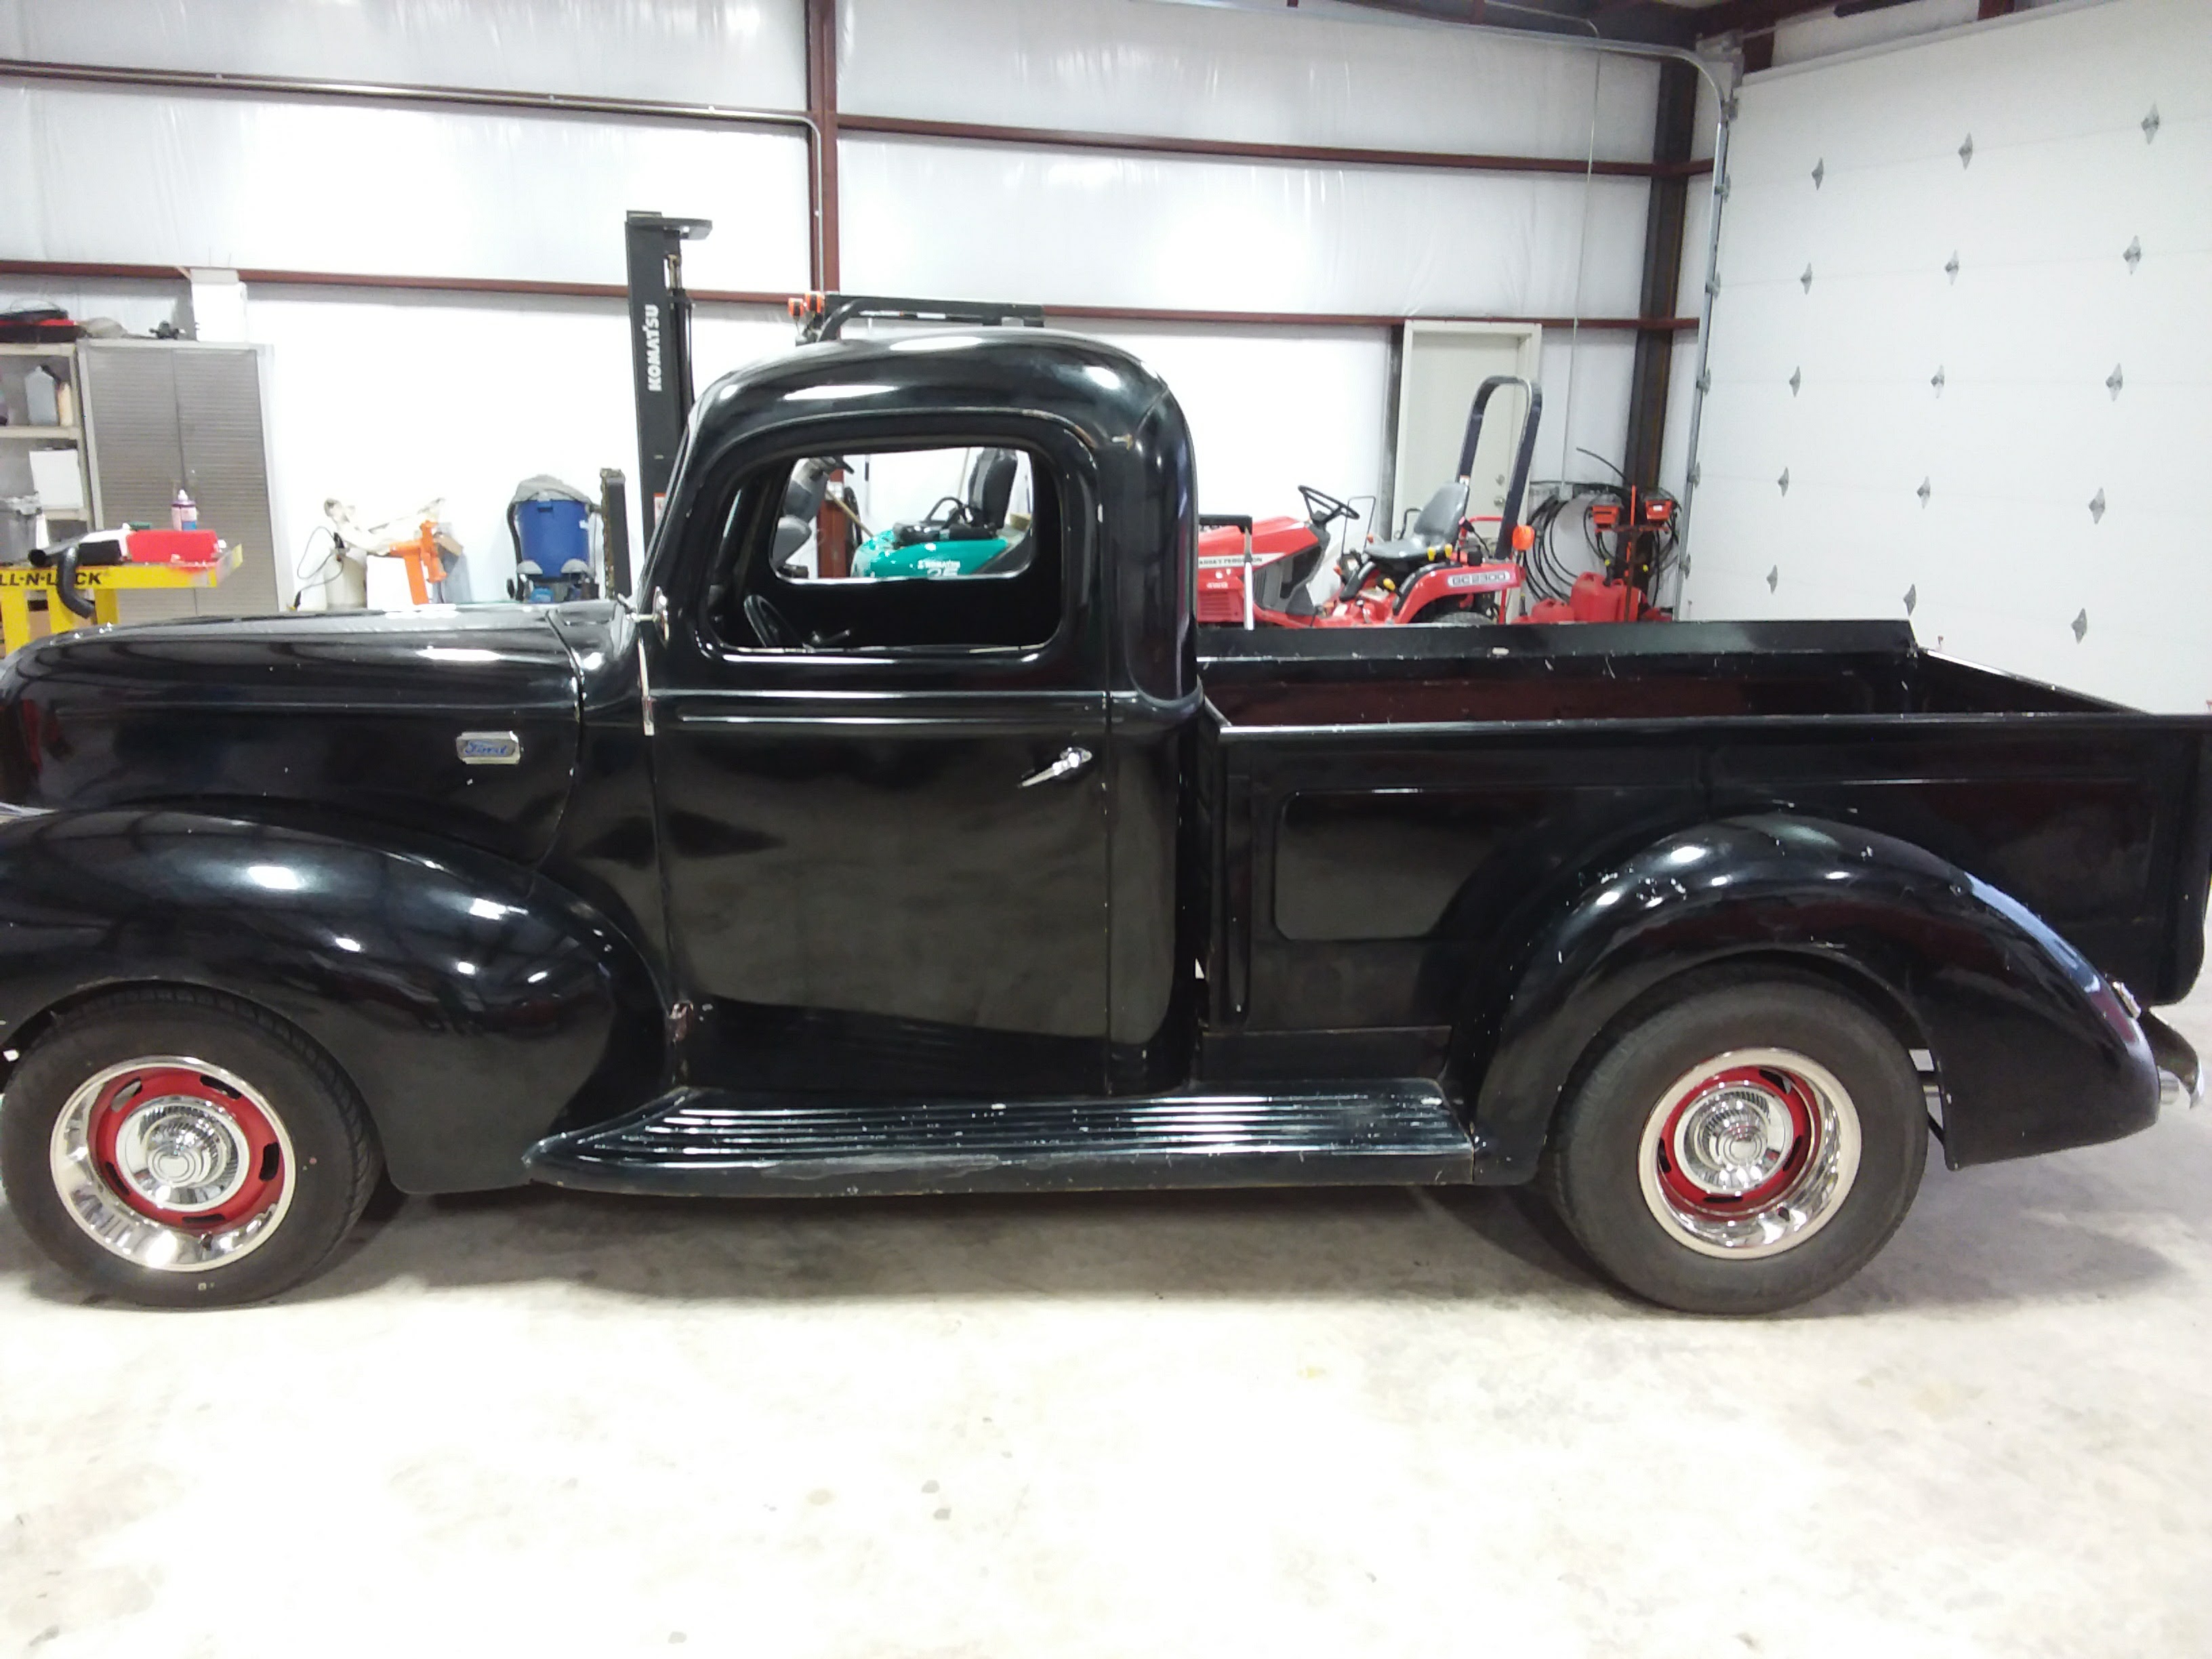 1952 Ford F100 After All-in-One Paint Correction